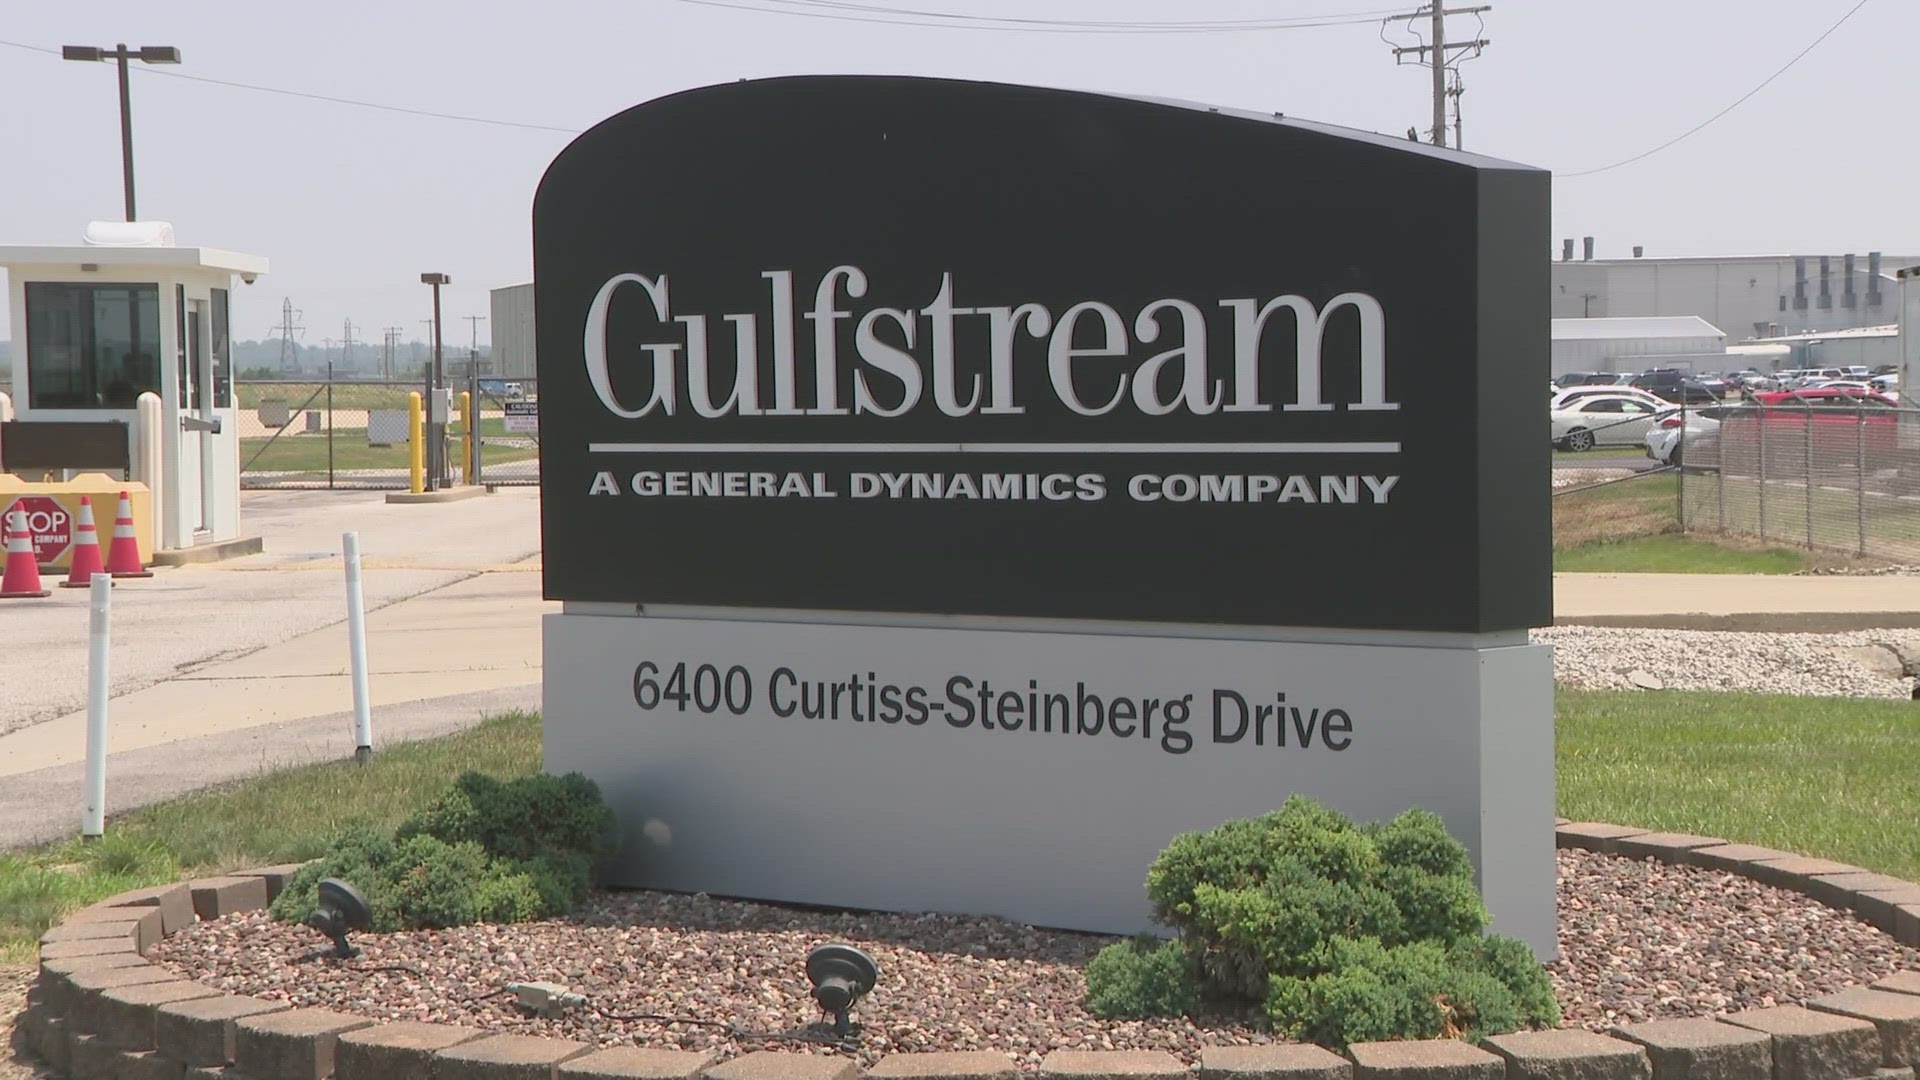 Gulfstream Aerospace announced it will expand operations at the airport in Cahokia Heights. Leaders there want to make a $28 million investment, adding 200 jobs.